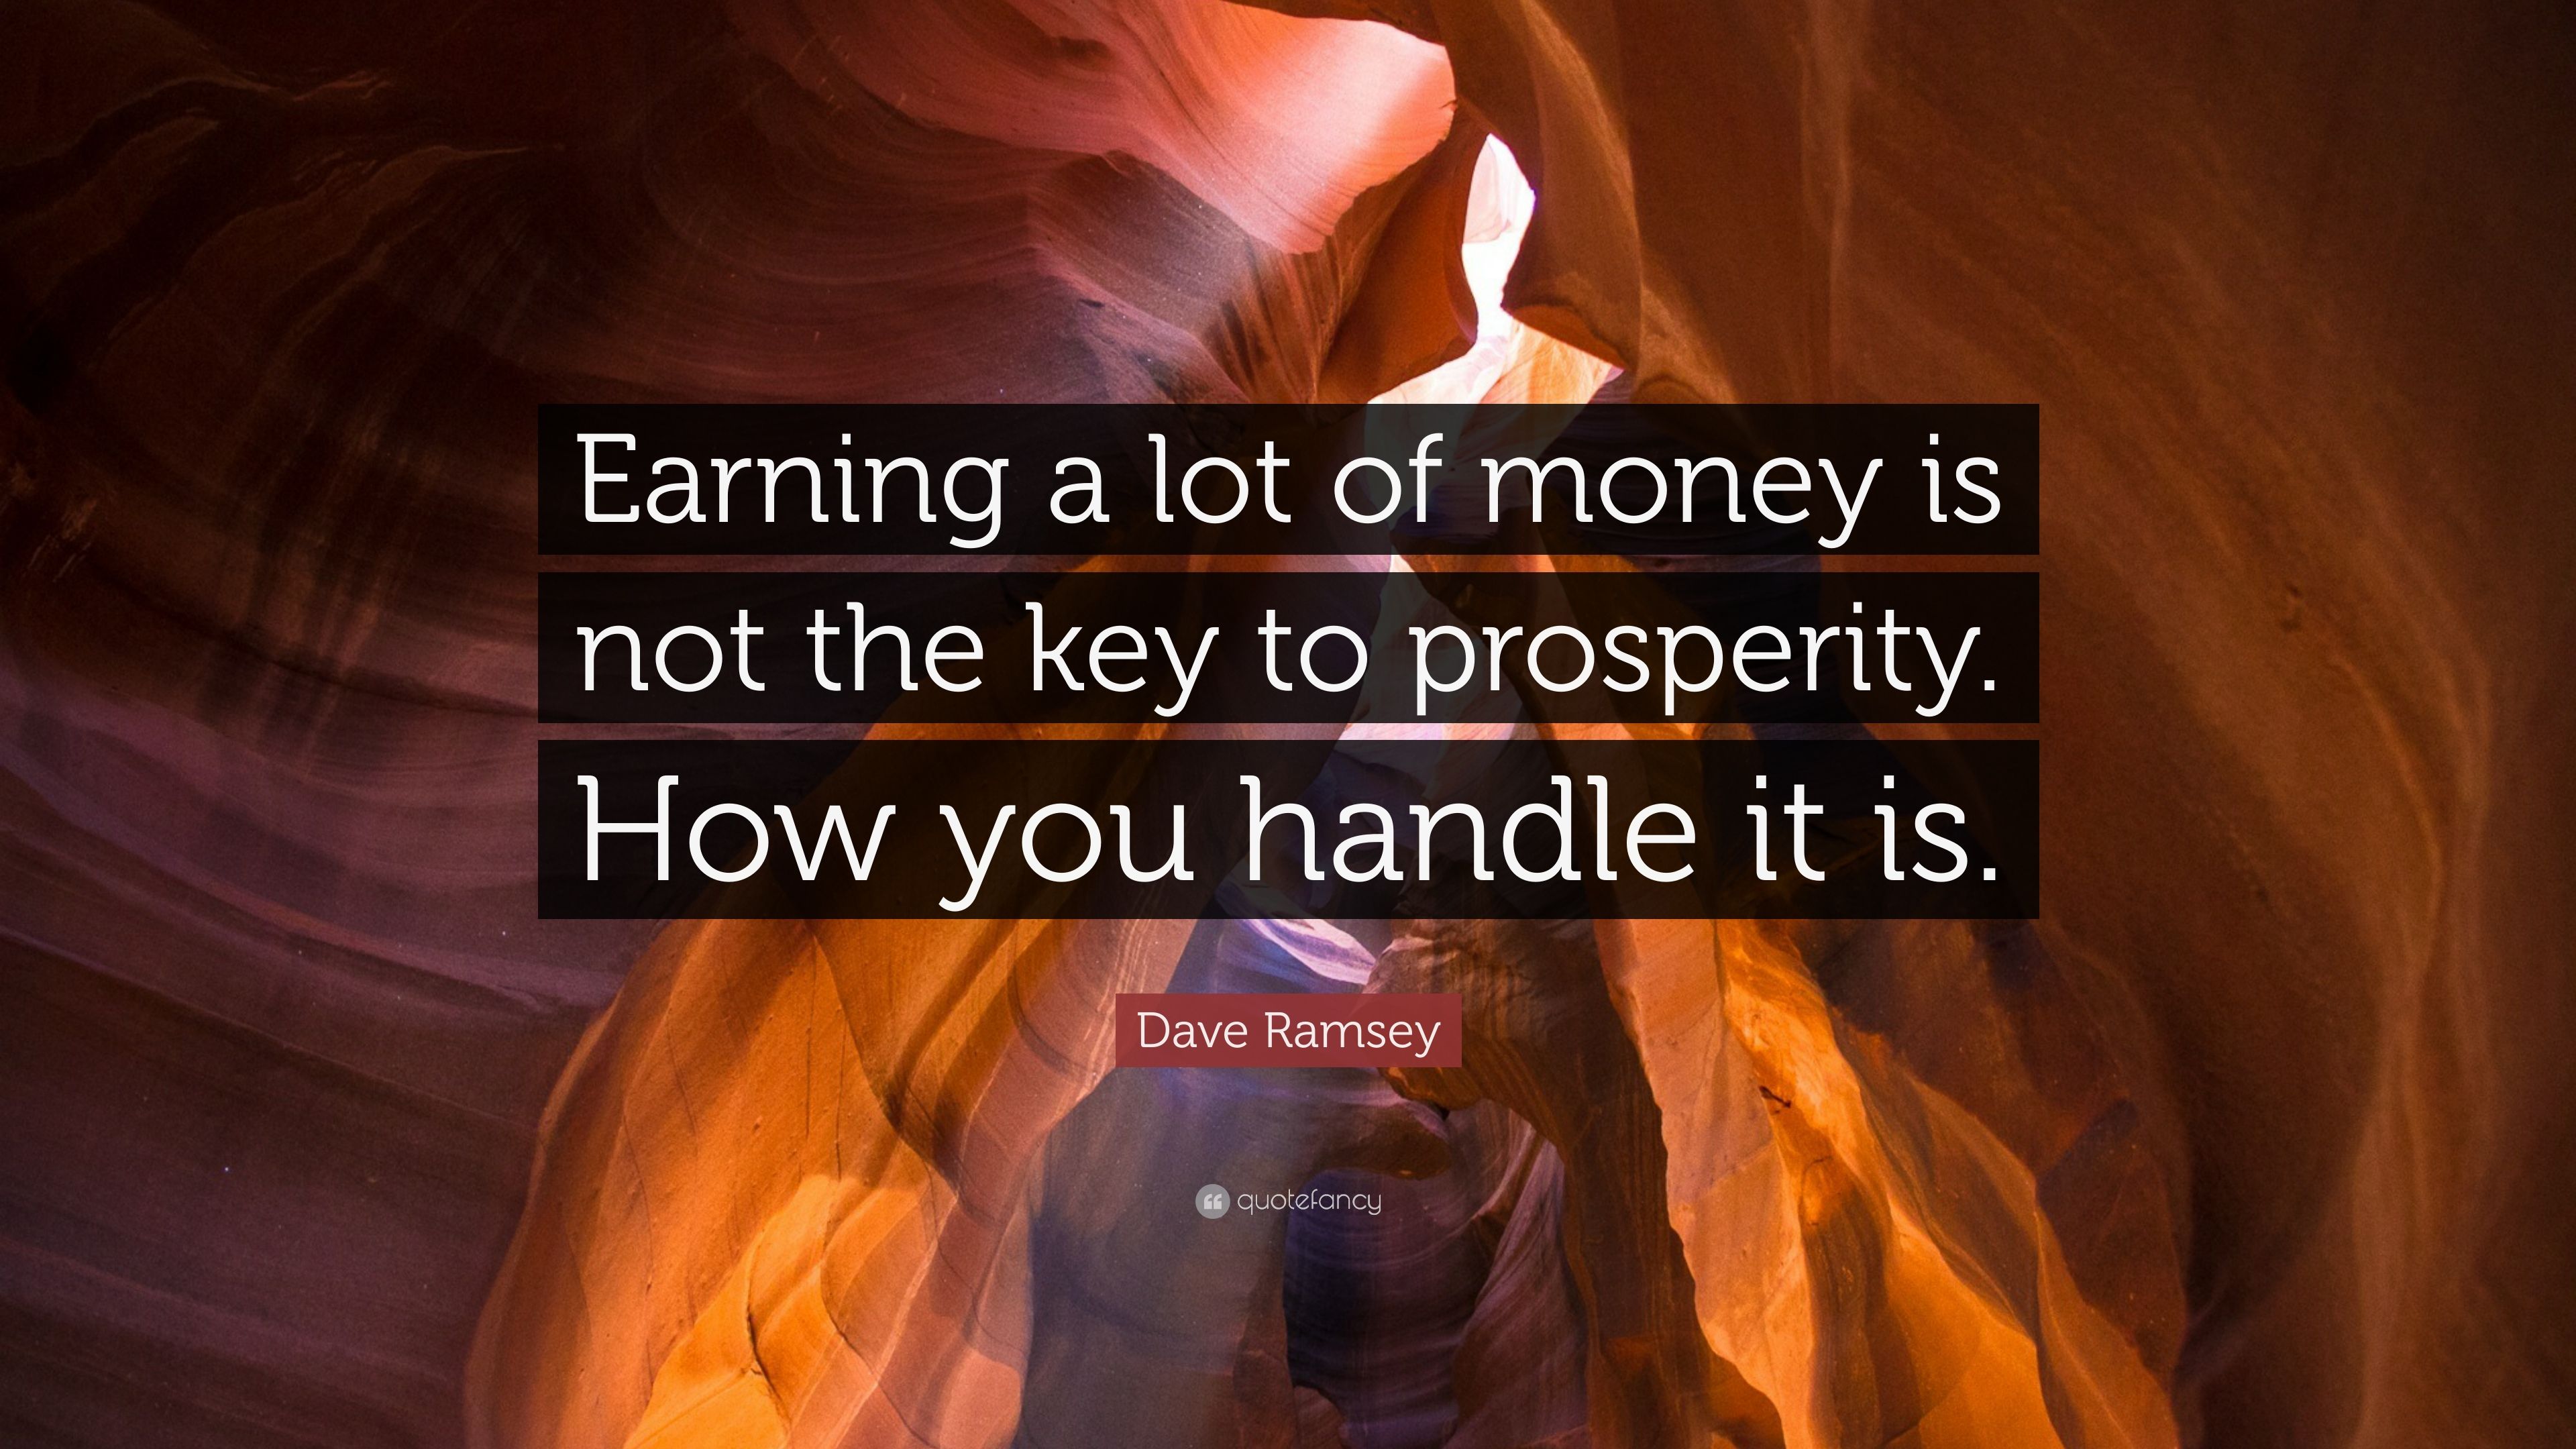 Dave Ramsey Quote: “Earning a lot of money is not the key to prosperity. How you handle it is.” (12 wallpaper)